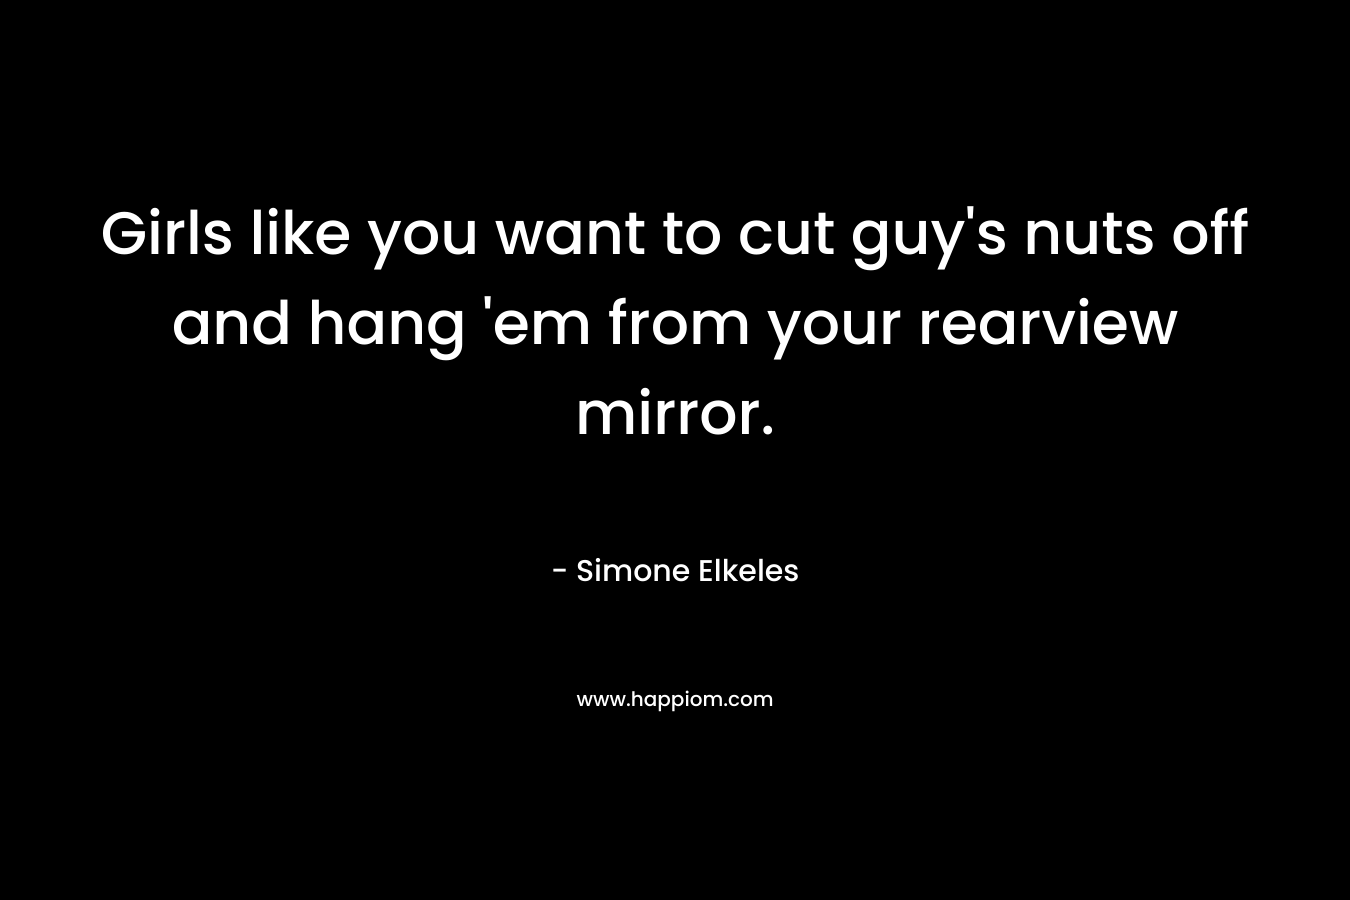 Girls like you want to cut guy's nuts off and hang 'em from your rearview mirror.